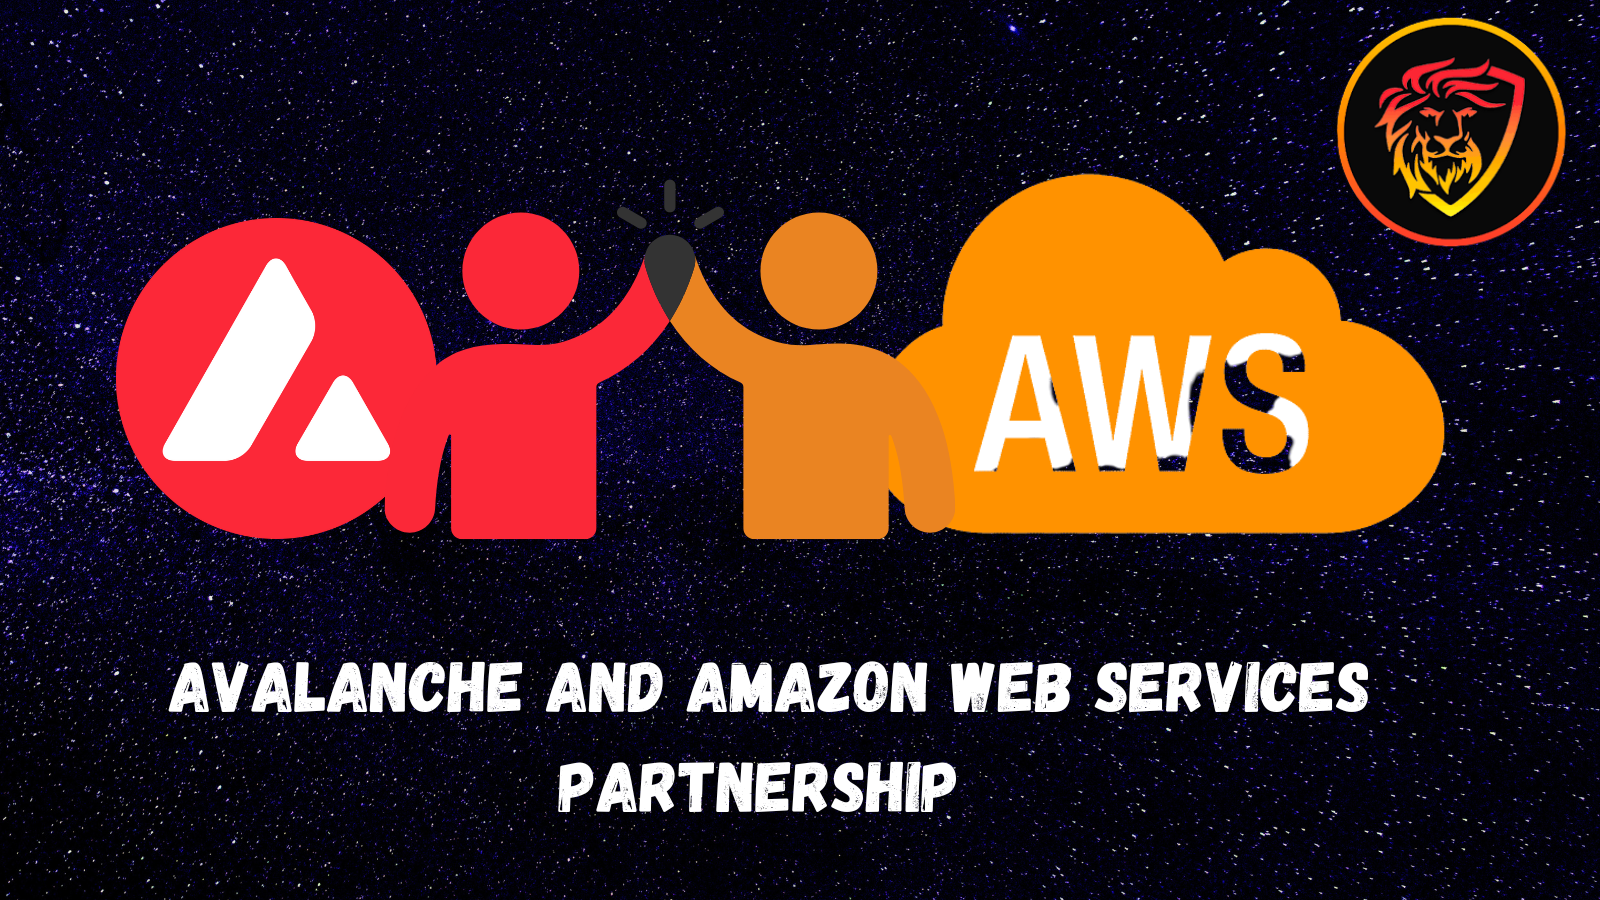 @idiosyncratic1/avalanche-partnership-with-amazon-web-services